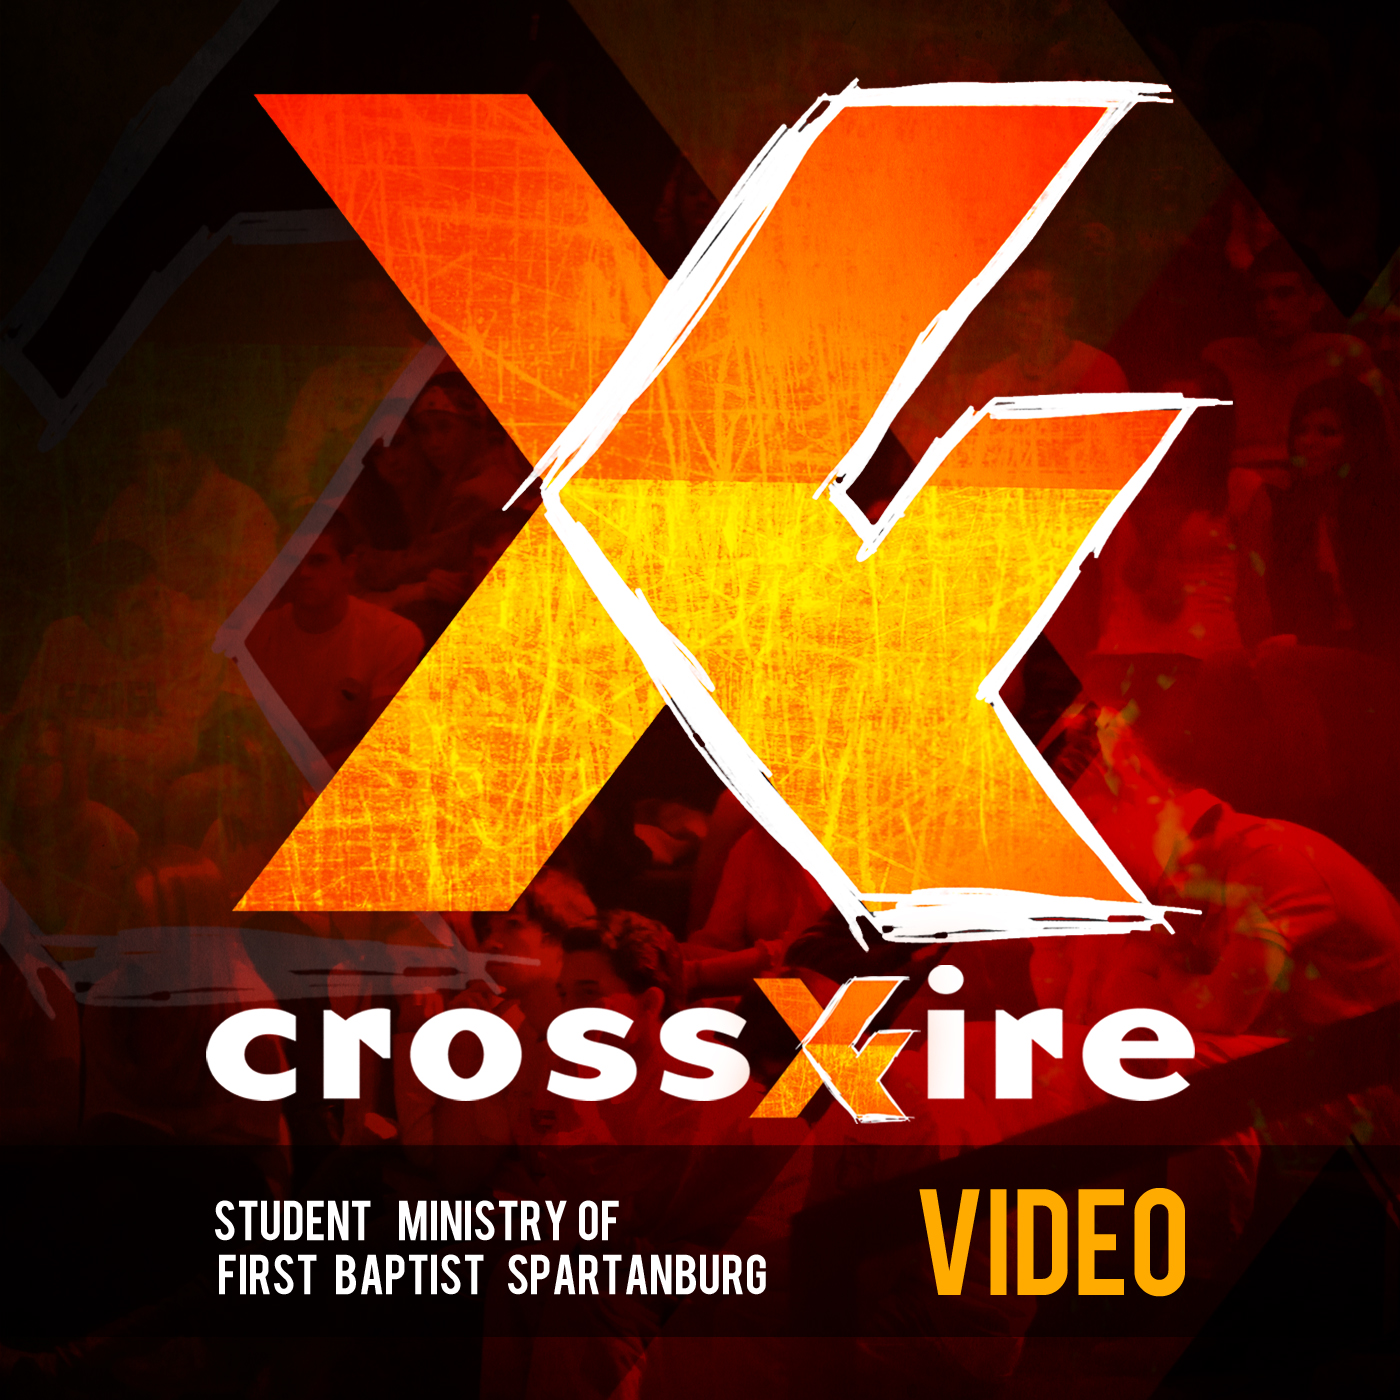 Crossfire at FBS - Video